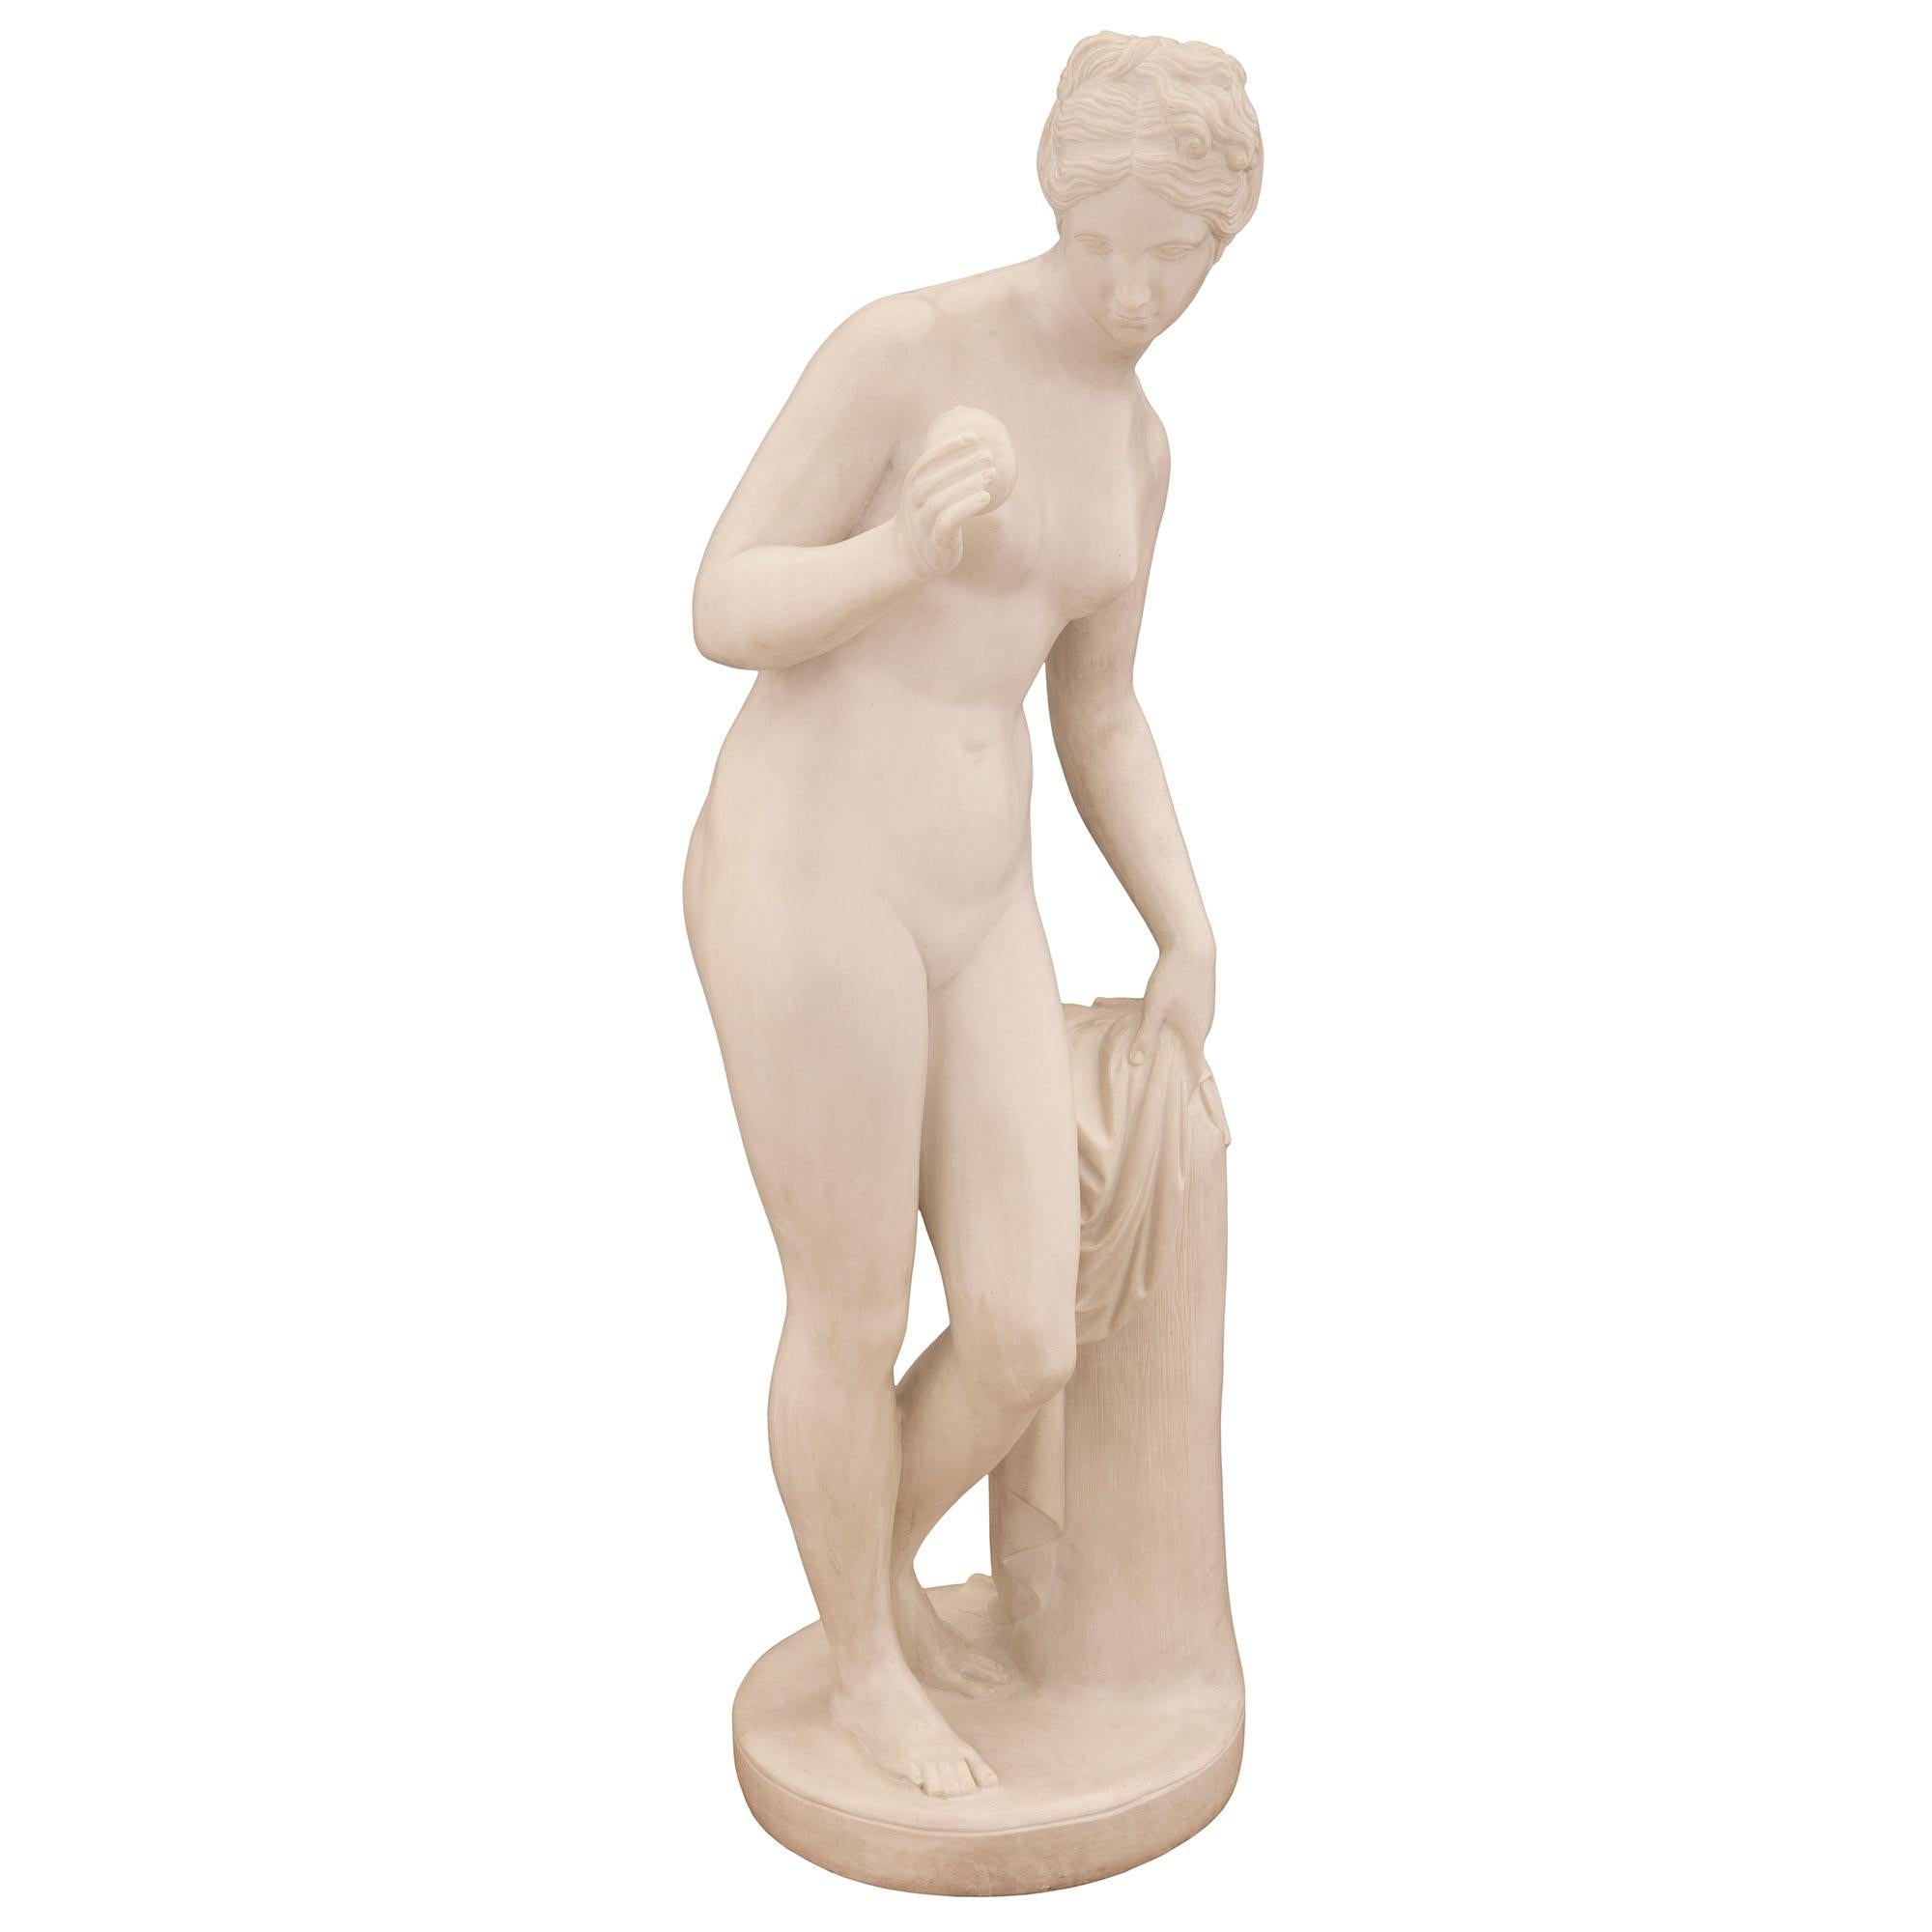 A beautiful Continental 19th century white Carrara marble statue of Venus after a model by Bertel Thorvaldsen. The striking statue is raised by a circular base where Venus stands next to a tree stump draped in a finely sculpted flowing fabric. Venus